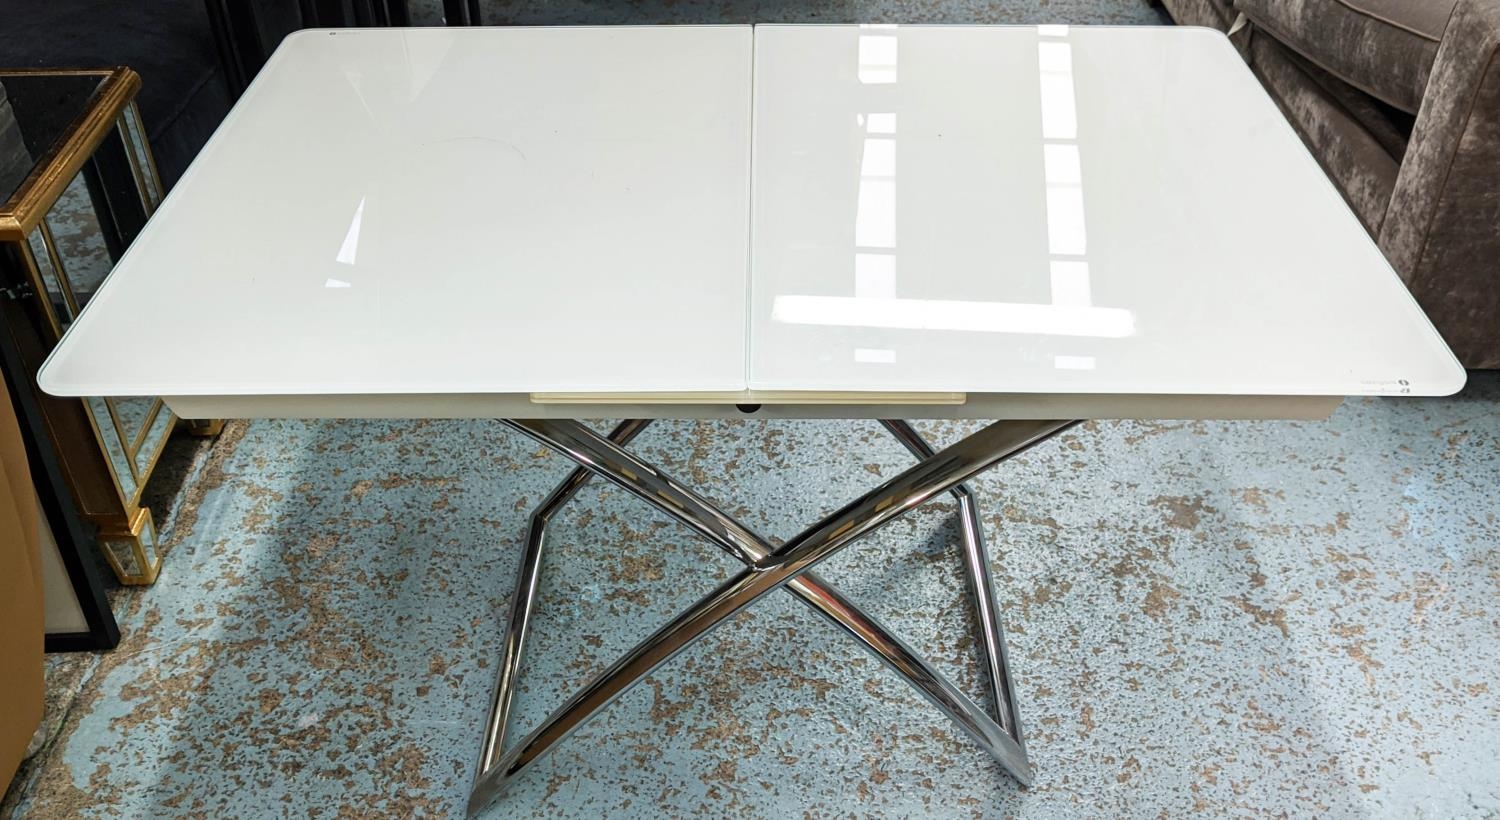 CALLIGARIS DAKOTA TABLE, design height and size adjustable, 140cm x 75cm x 71cm at largest approx.